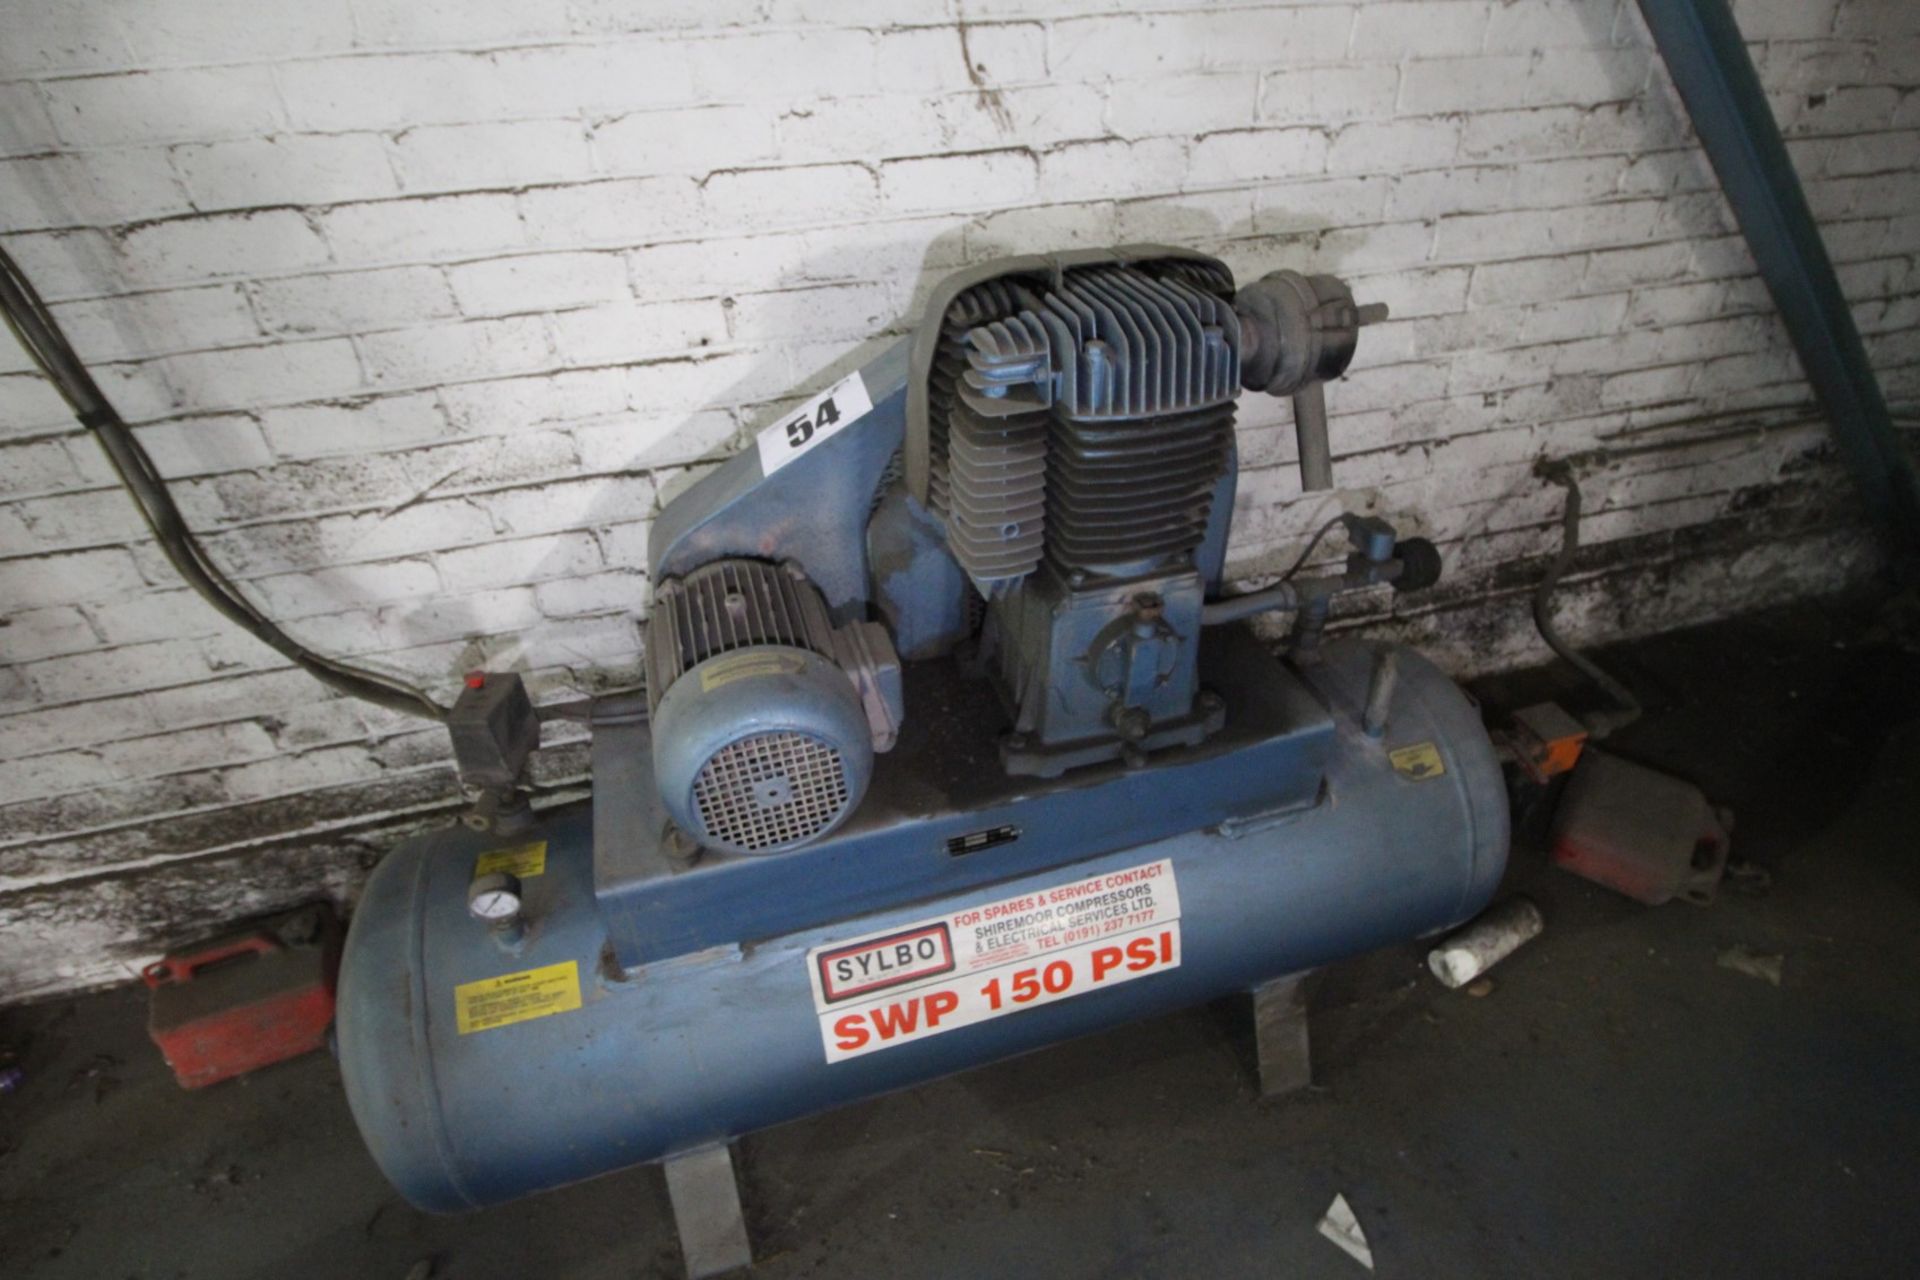 SYLBO, TWIN-PISTON WORKSHOP COMPRESSOR, 3-PHASE ELECTRIC, MODEL NO. AM36EF250. THE PURCHASER IS